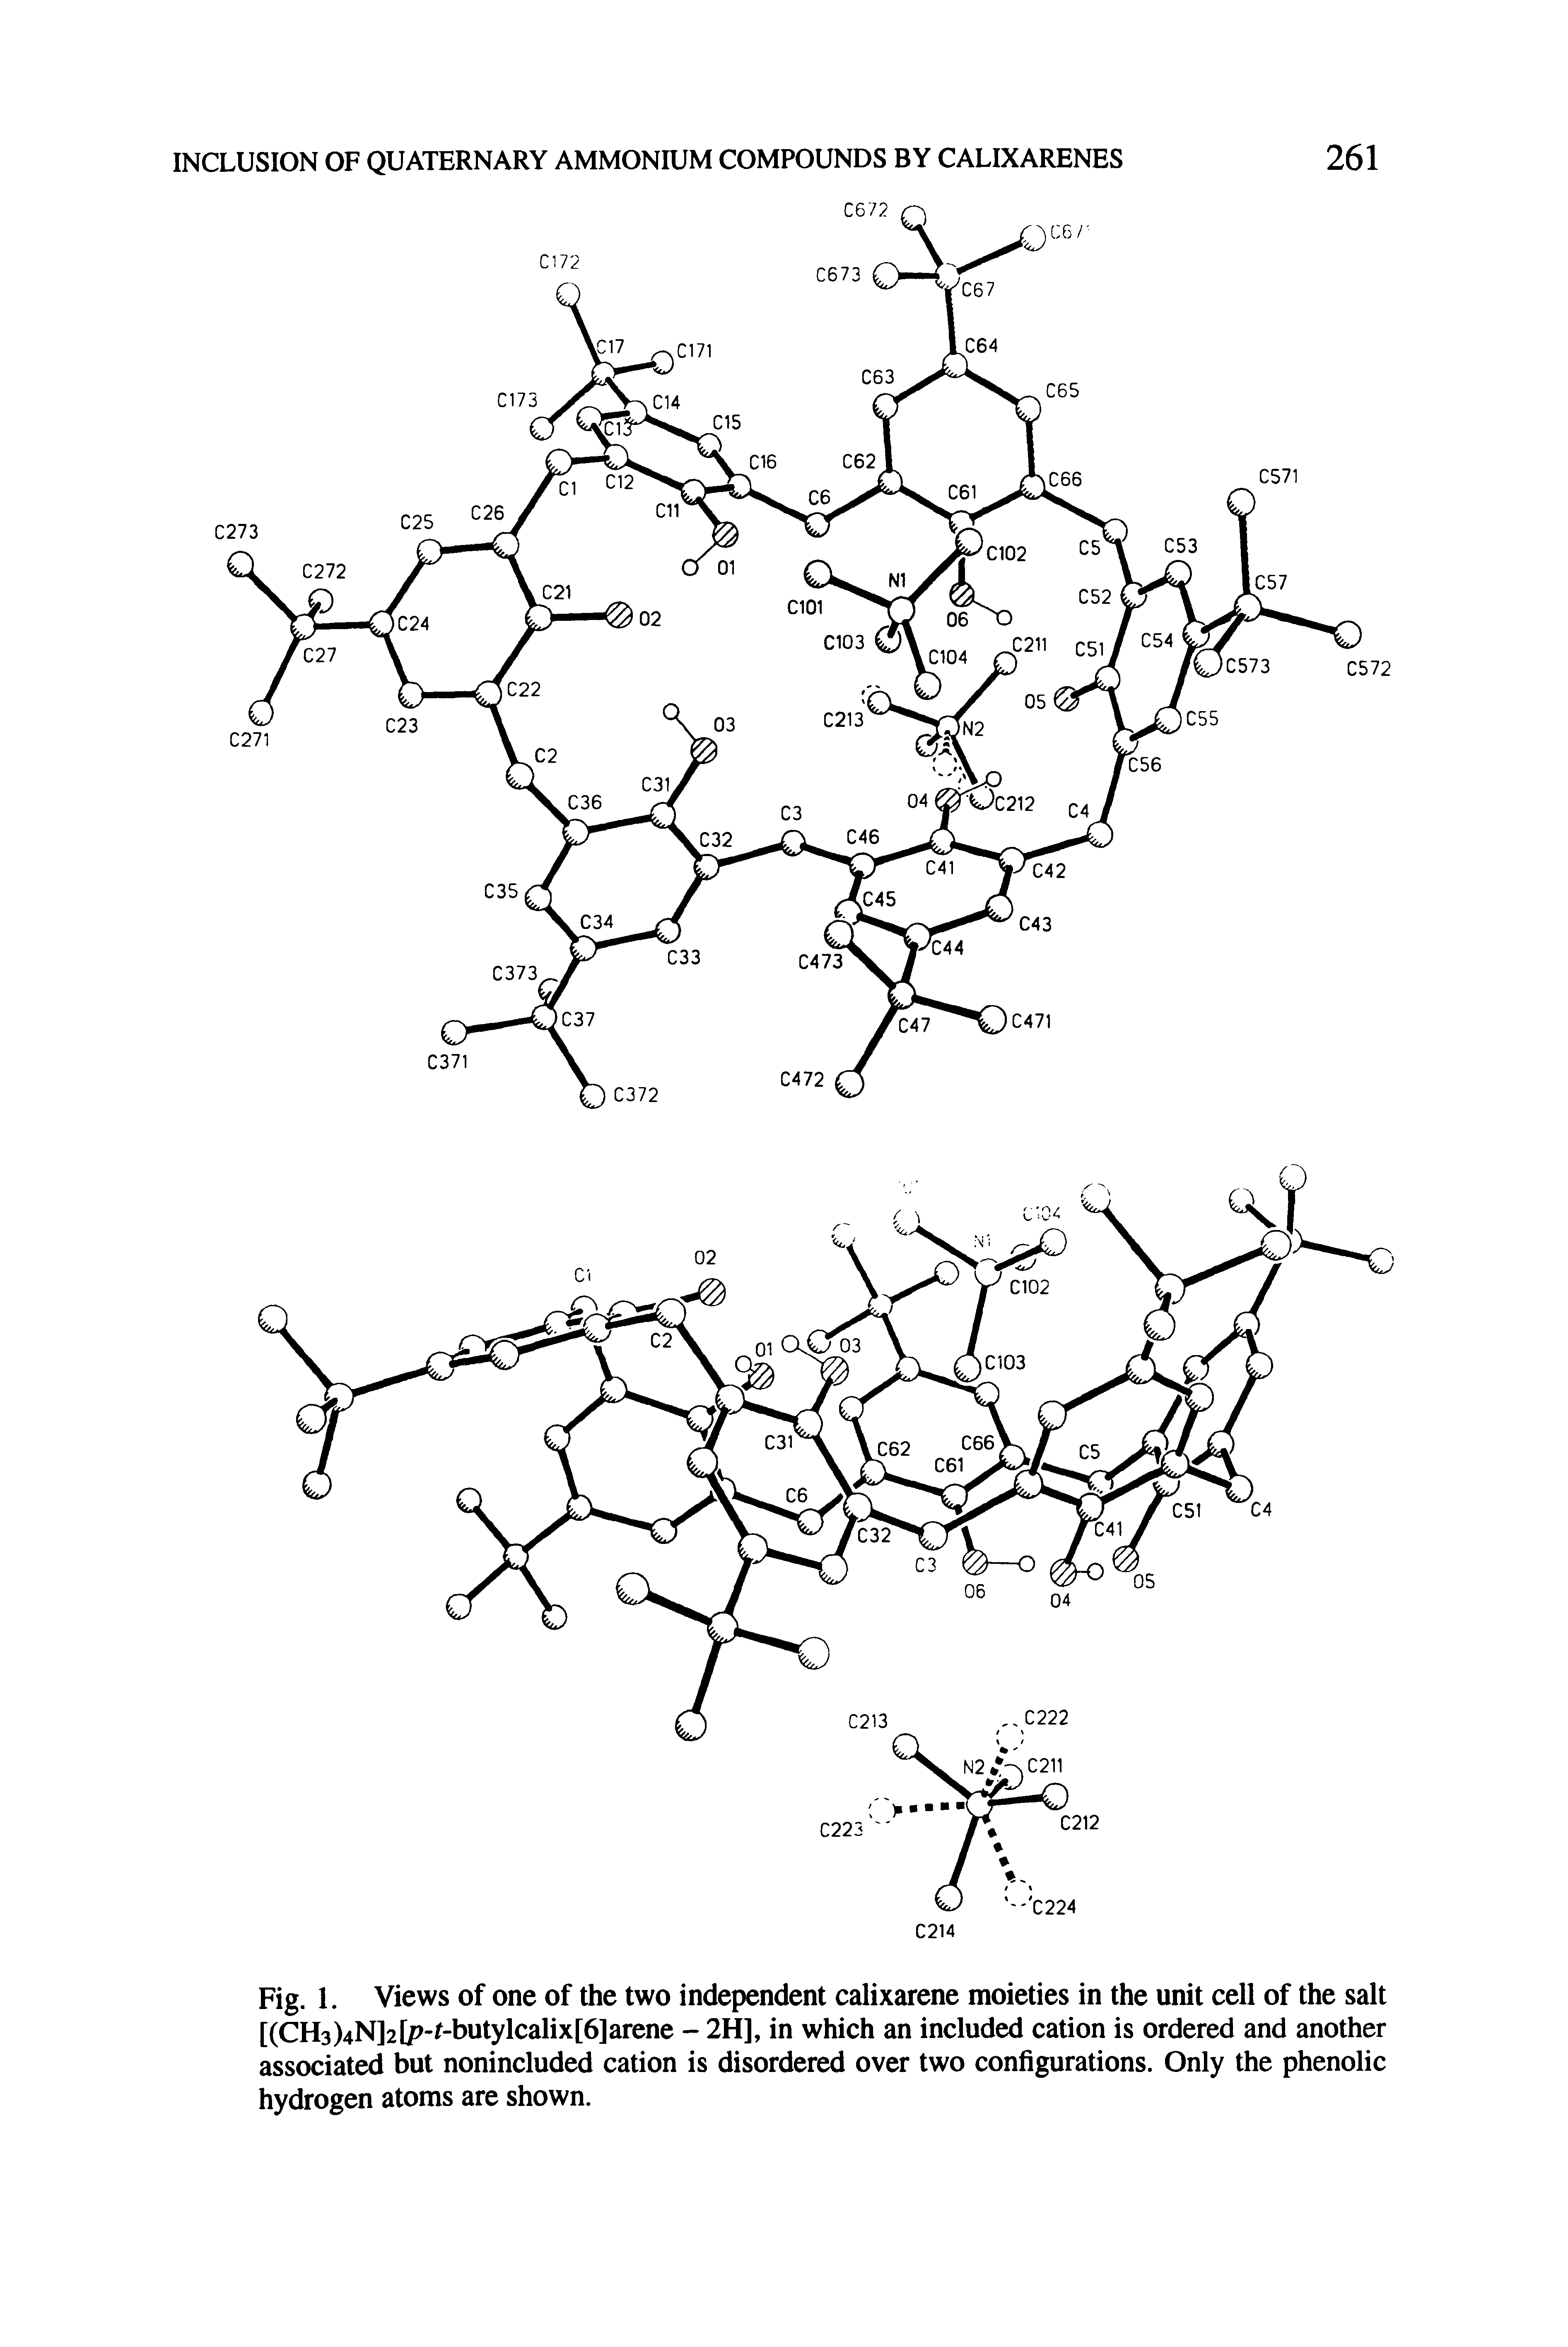 Fig. 1. Views of one of the two independent calixarene moieties in the unit cell of the salt [(CH3)4N]2l>- -hutylcalix[6]arene - 2H], in which an included cation is ordered and another associated but nonincluded cation is disordered over two configurations. Only the phenolic hydrogen atoms are shown.